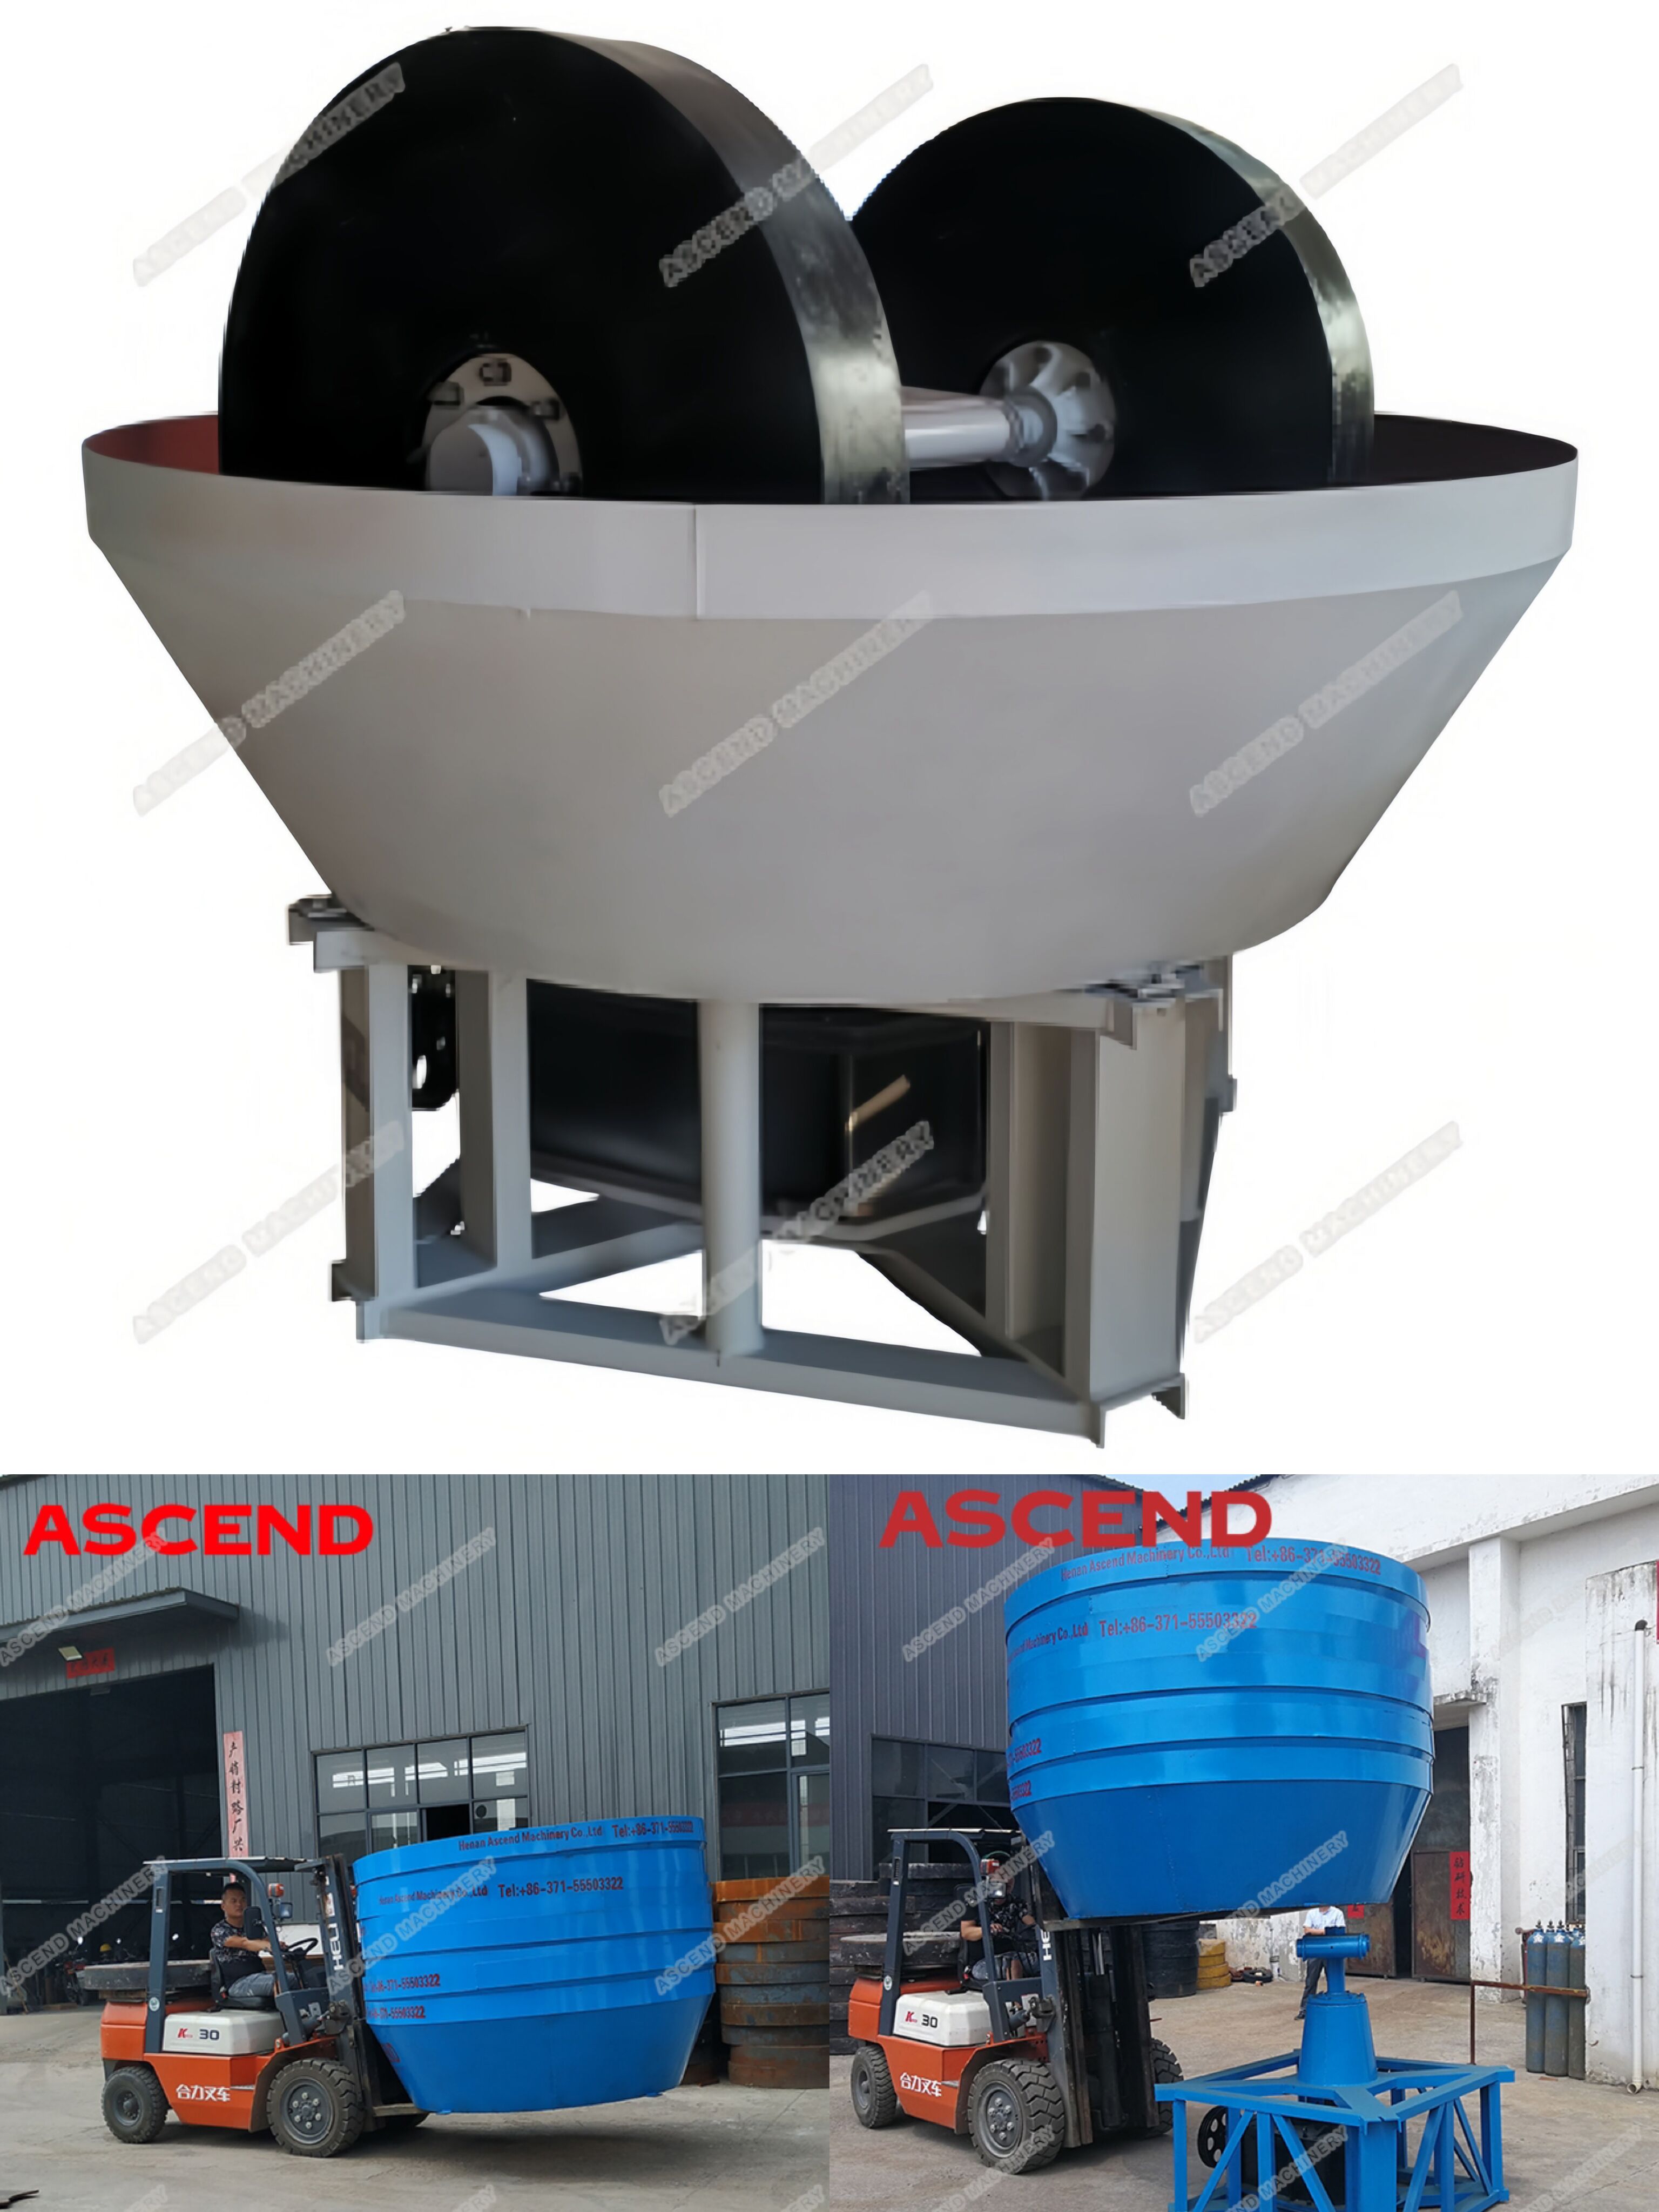 Ascend Group 1200 Wet Pan Mill Equipment Sent to Zambia